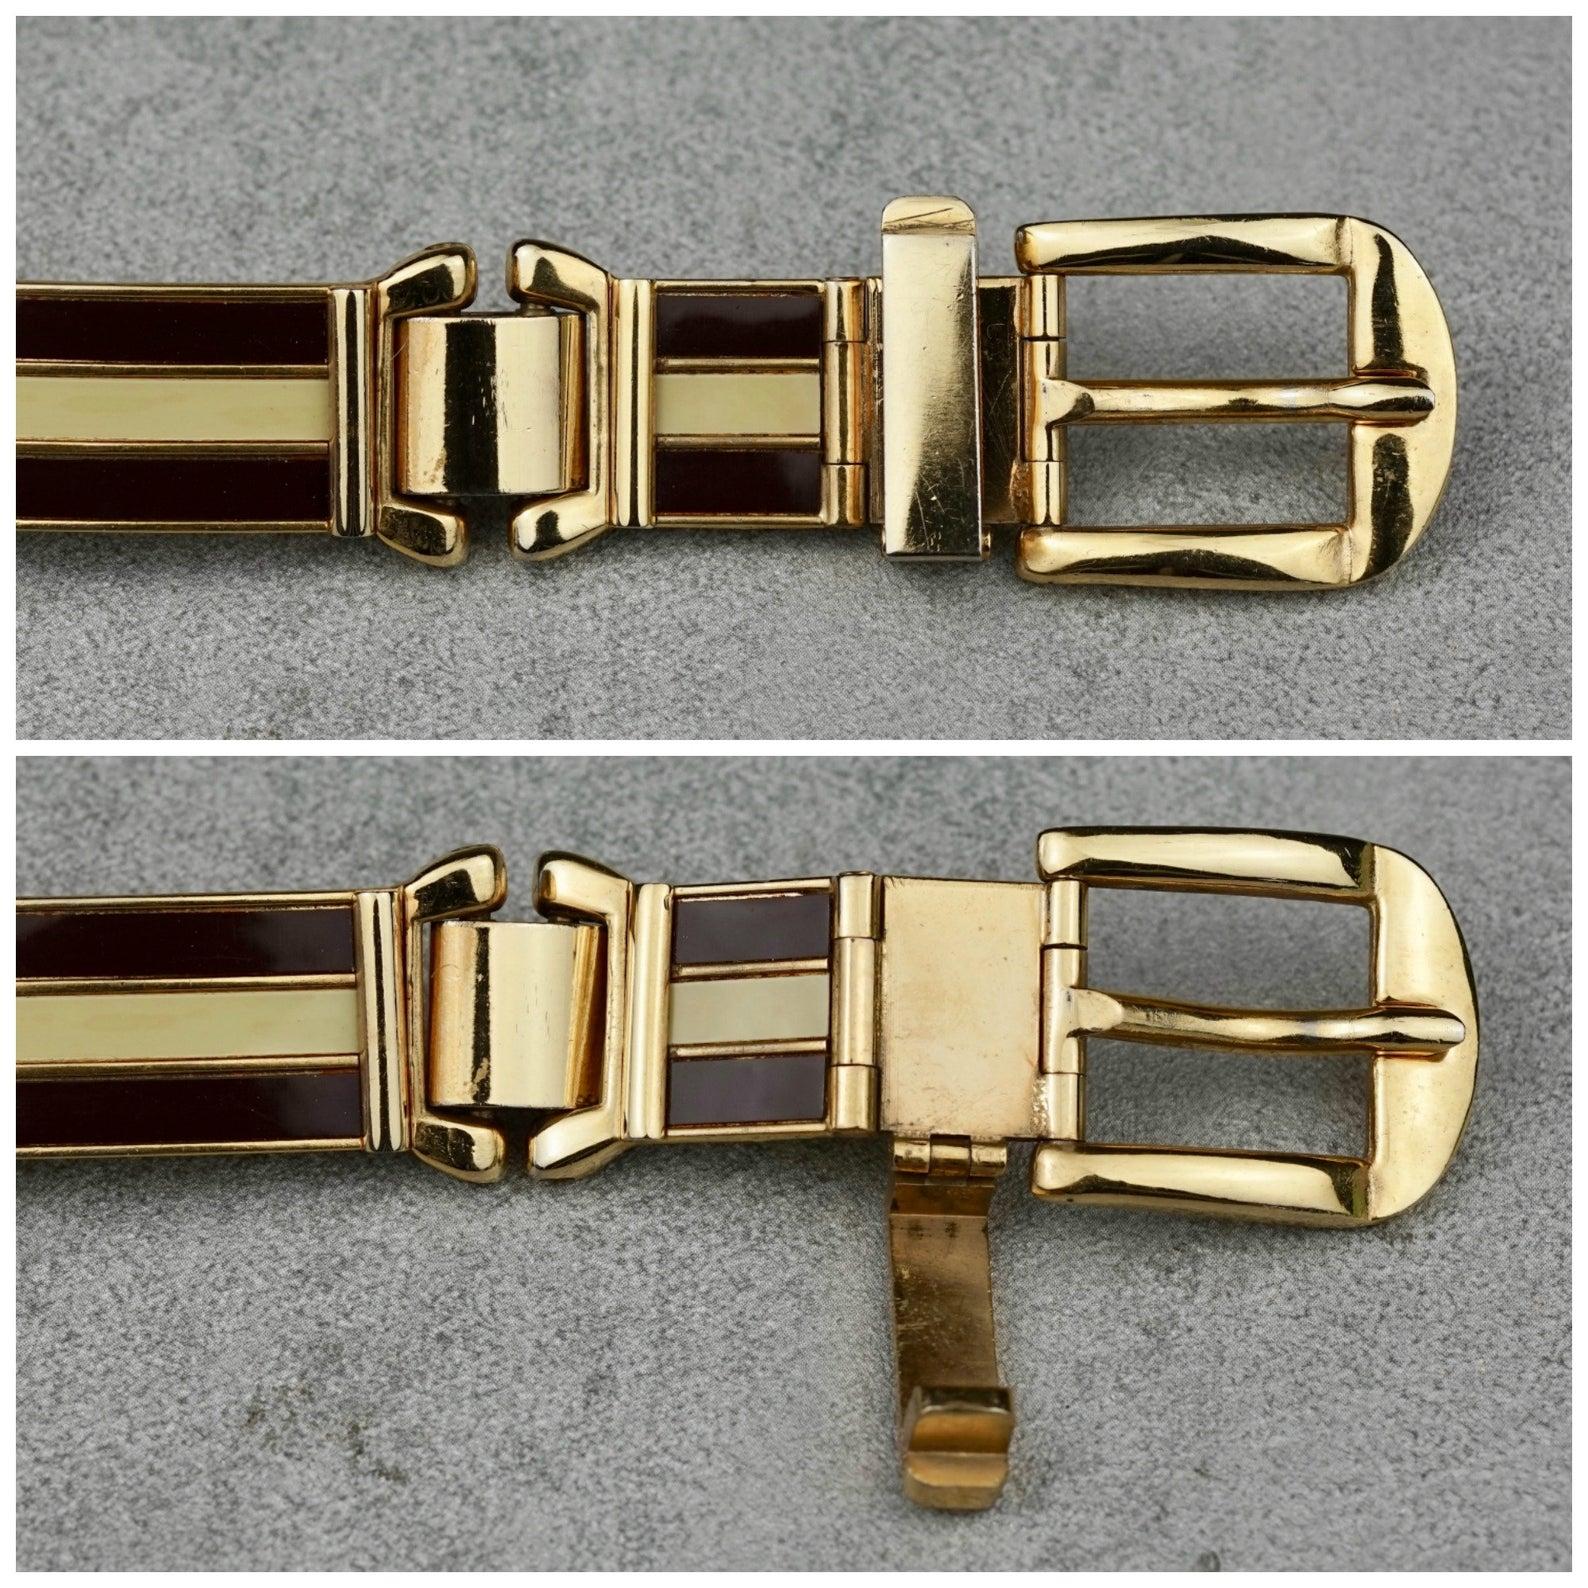 Vintage Iconic GUCCI Gold Enamel Buckle Belt In Excellent Condition For Sale In Kingersheim, Alsace